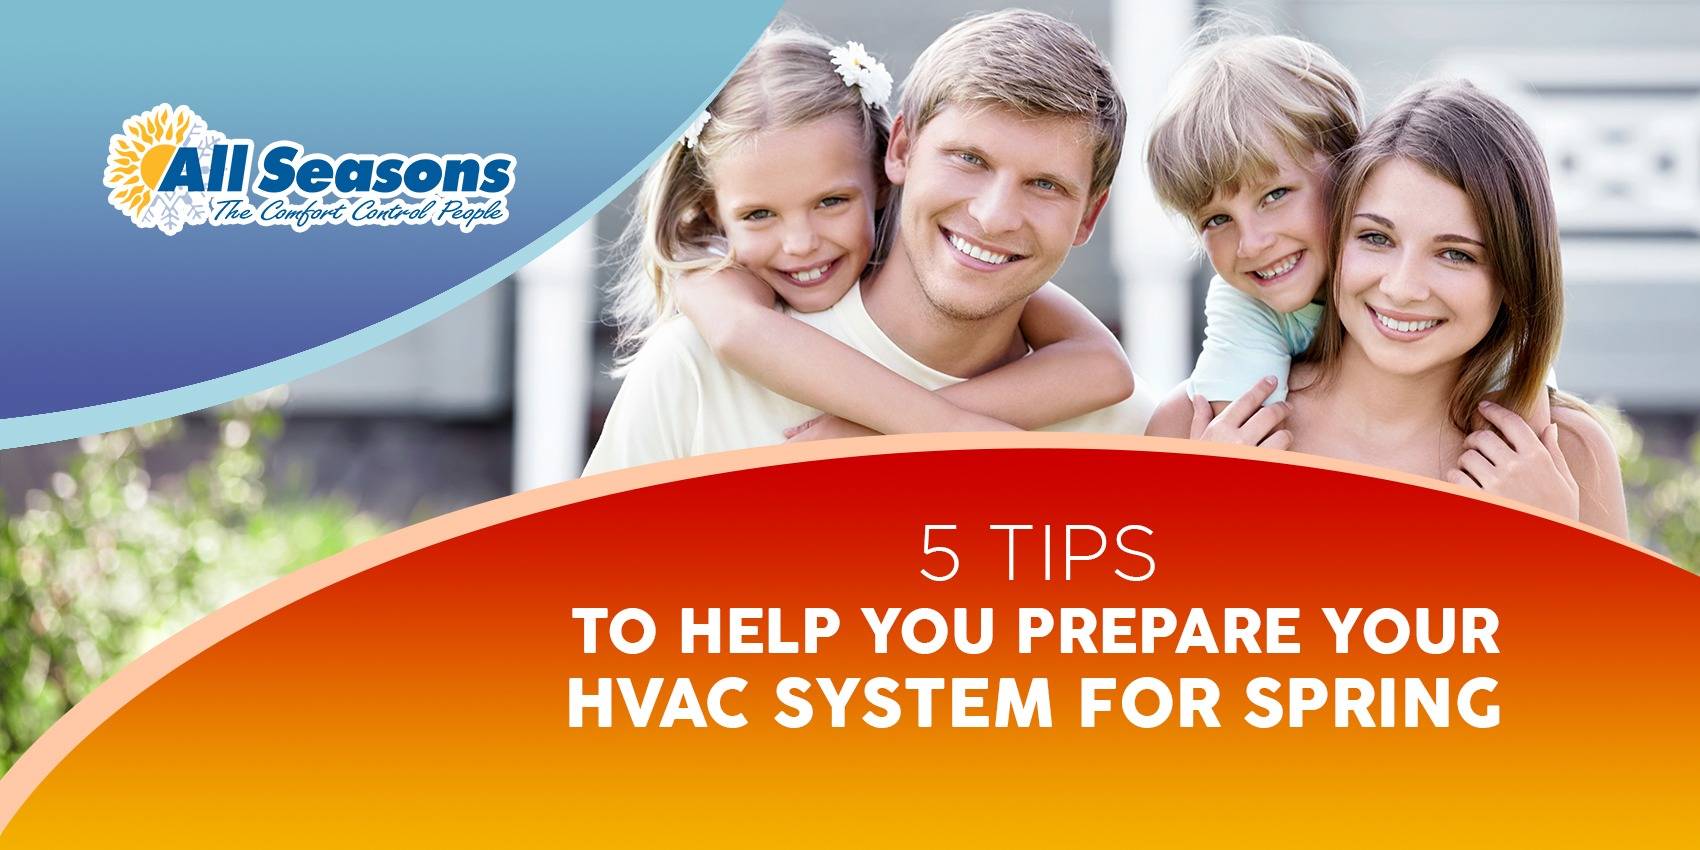 5 Tips to Help Prepare Your HVAC System for Spring